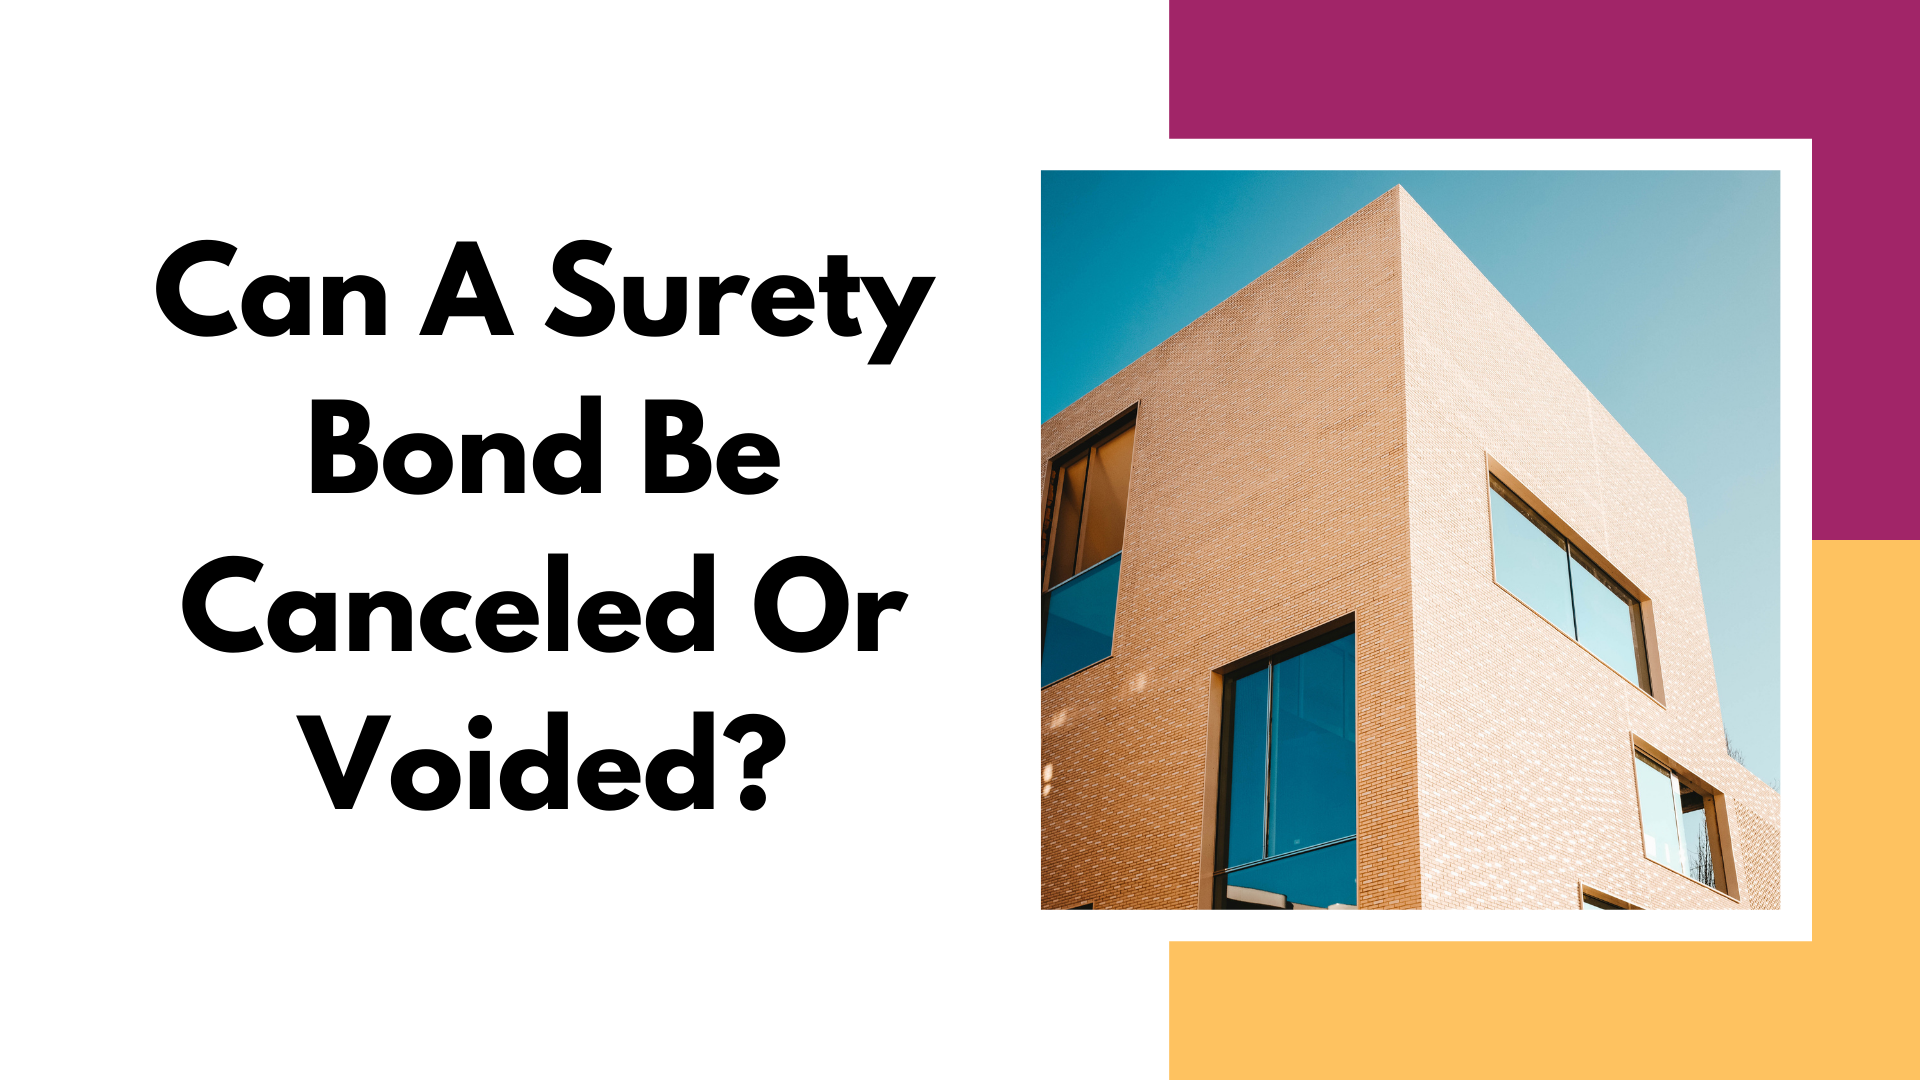 surety bond - What is a surety bond and what does it guarantee - building